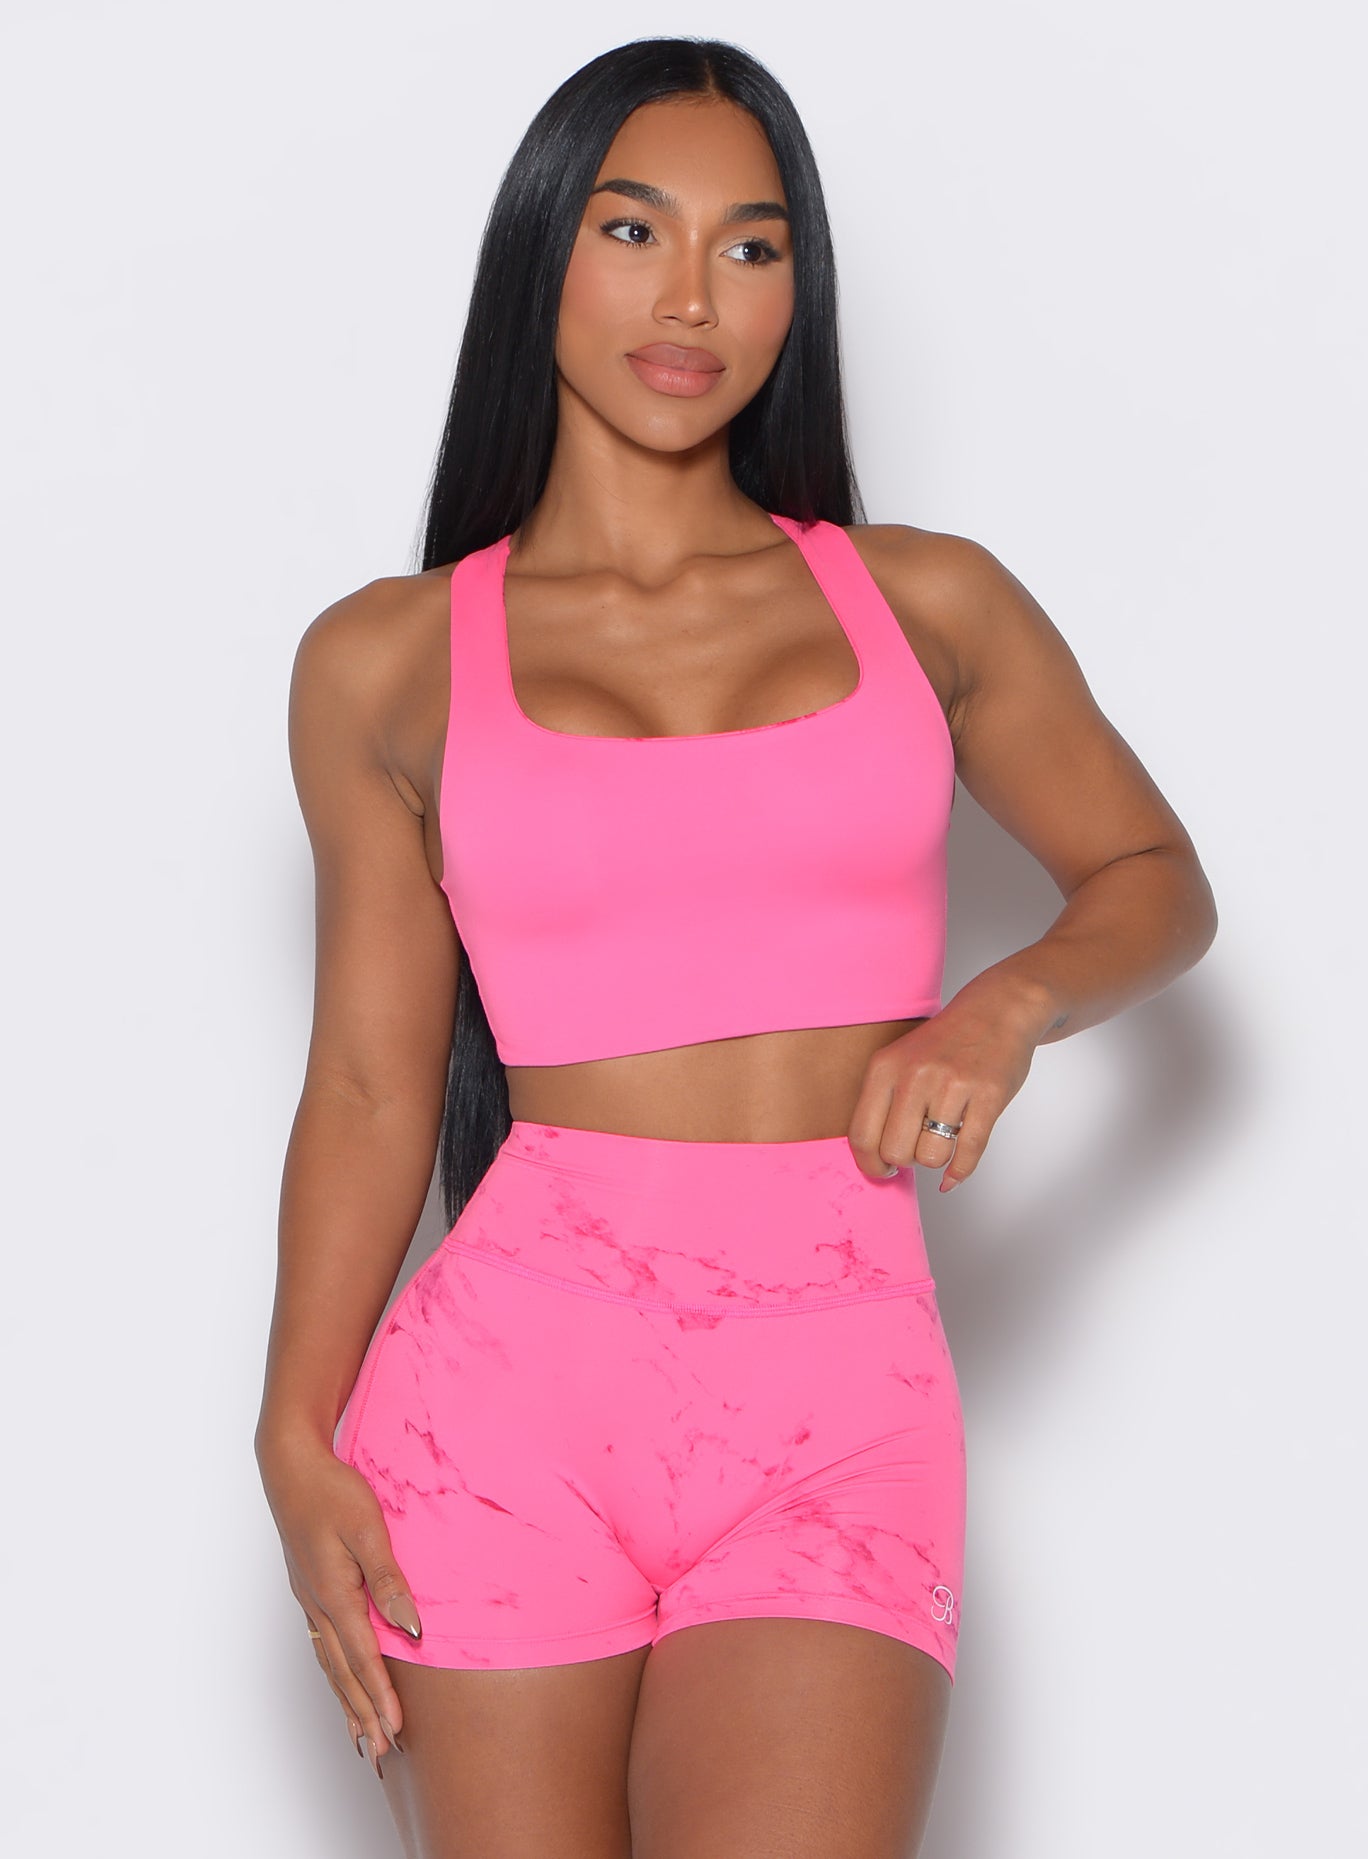 Front profile view of our model holding the waistband of the shorts wearing the  Square Neck Bra in cotton candy skies color along with the matching shorts